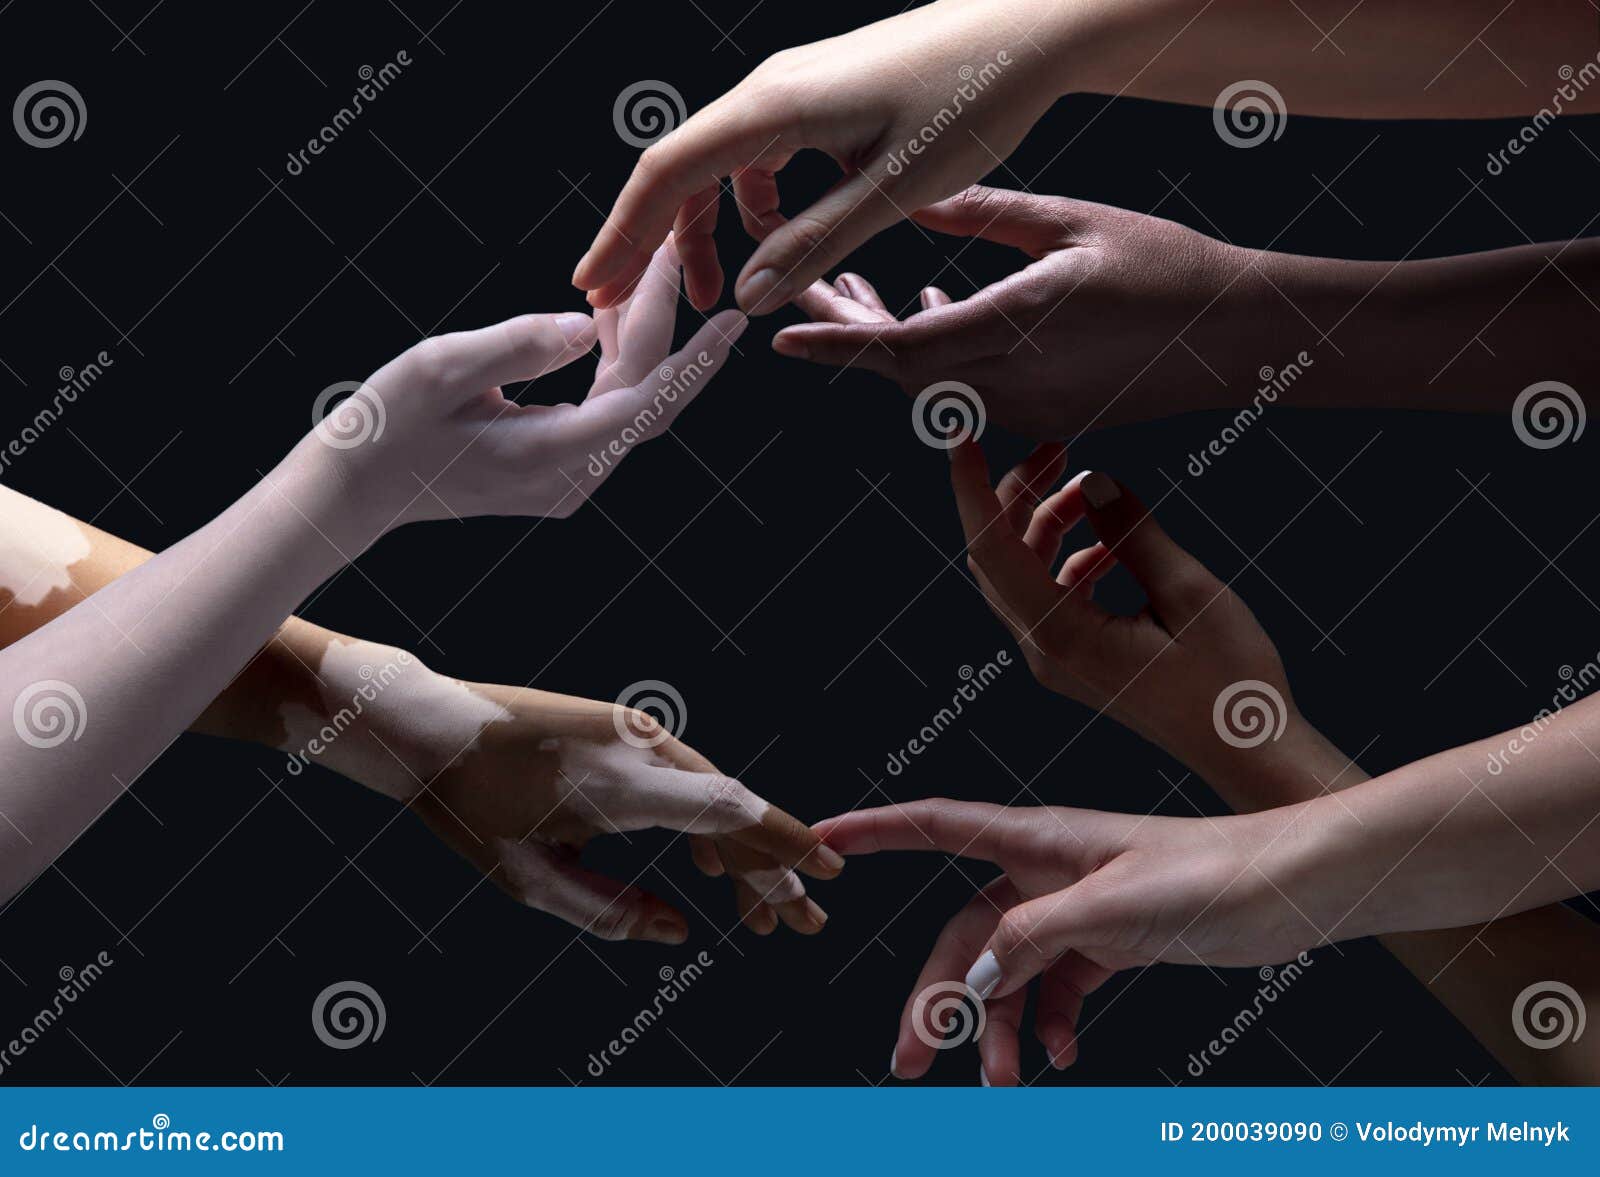 Hands of Different People in Touch Isolated on Black Studio Background ...